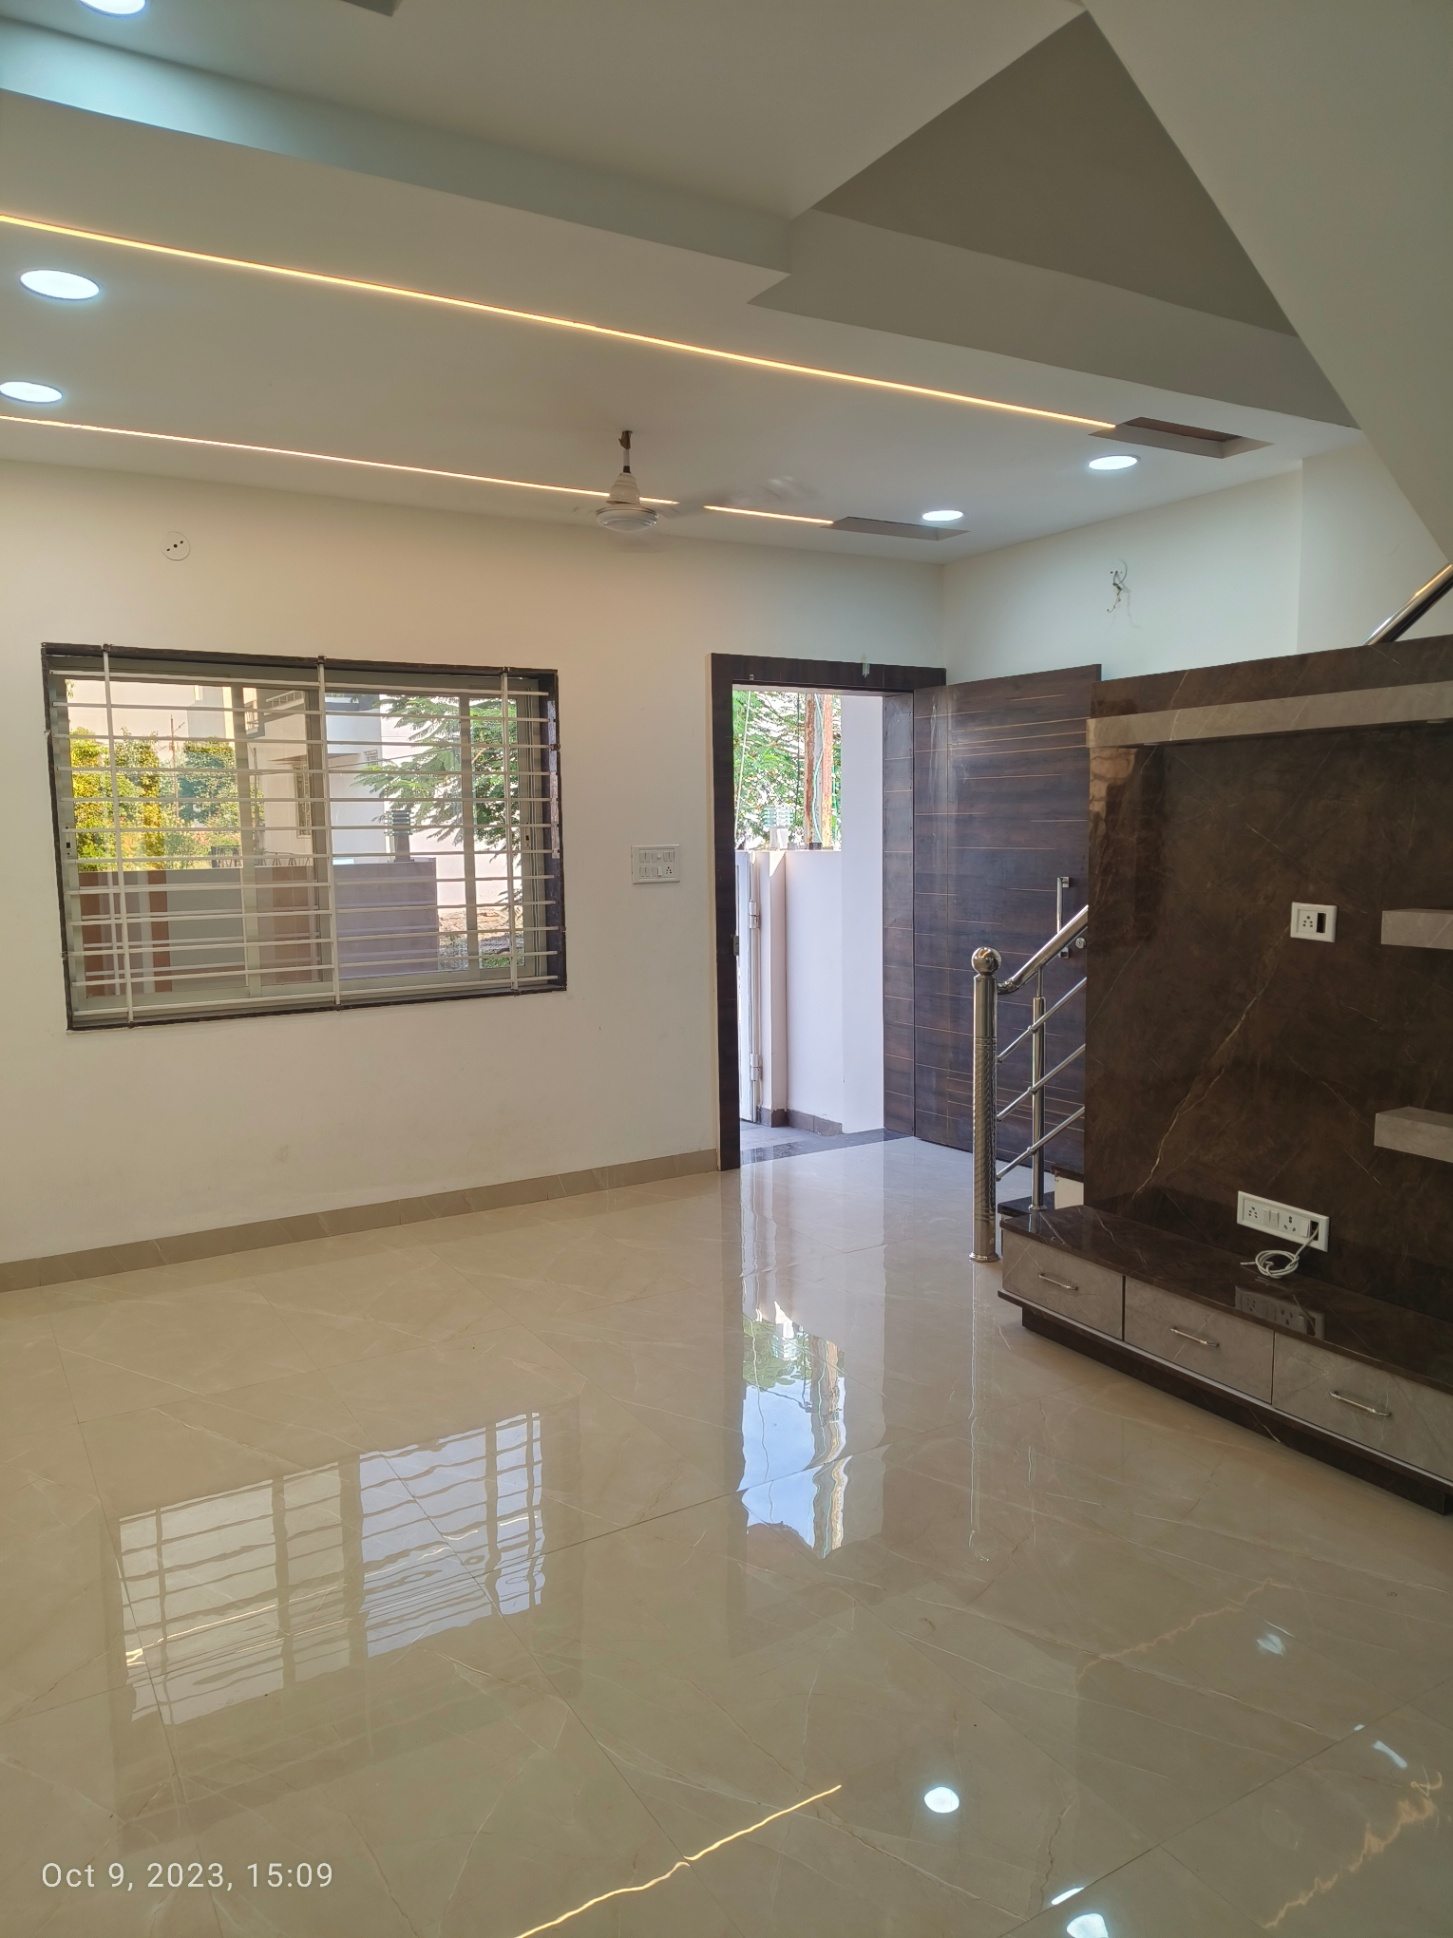 4 Bed/ 4 Bath Sell House/ Bungalow/ Villa; 600 sq. ft. carpet area; 600 sq. ft. lot for sale @D Mart Nipania